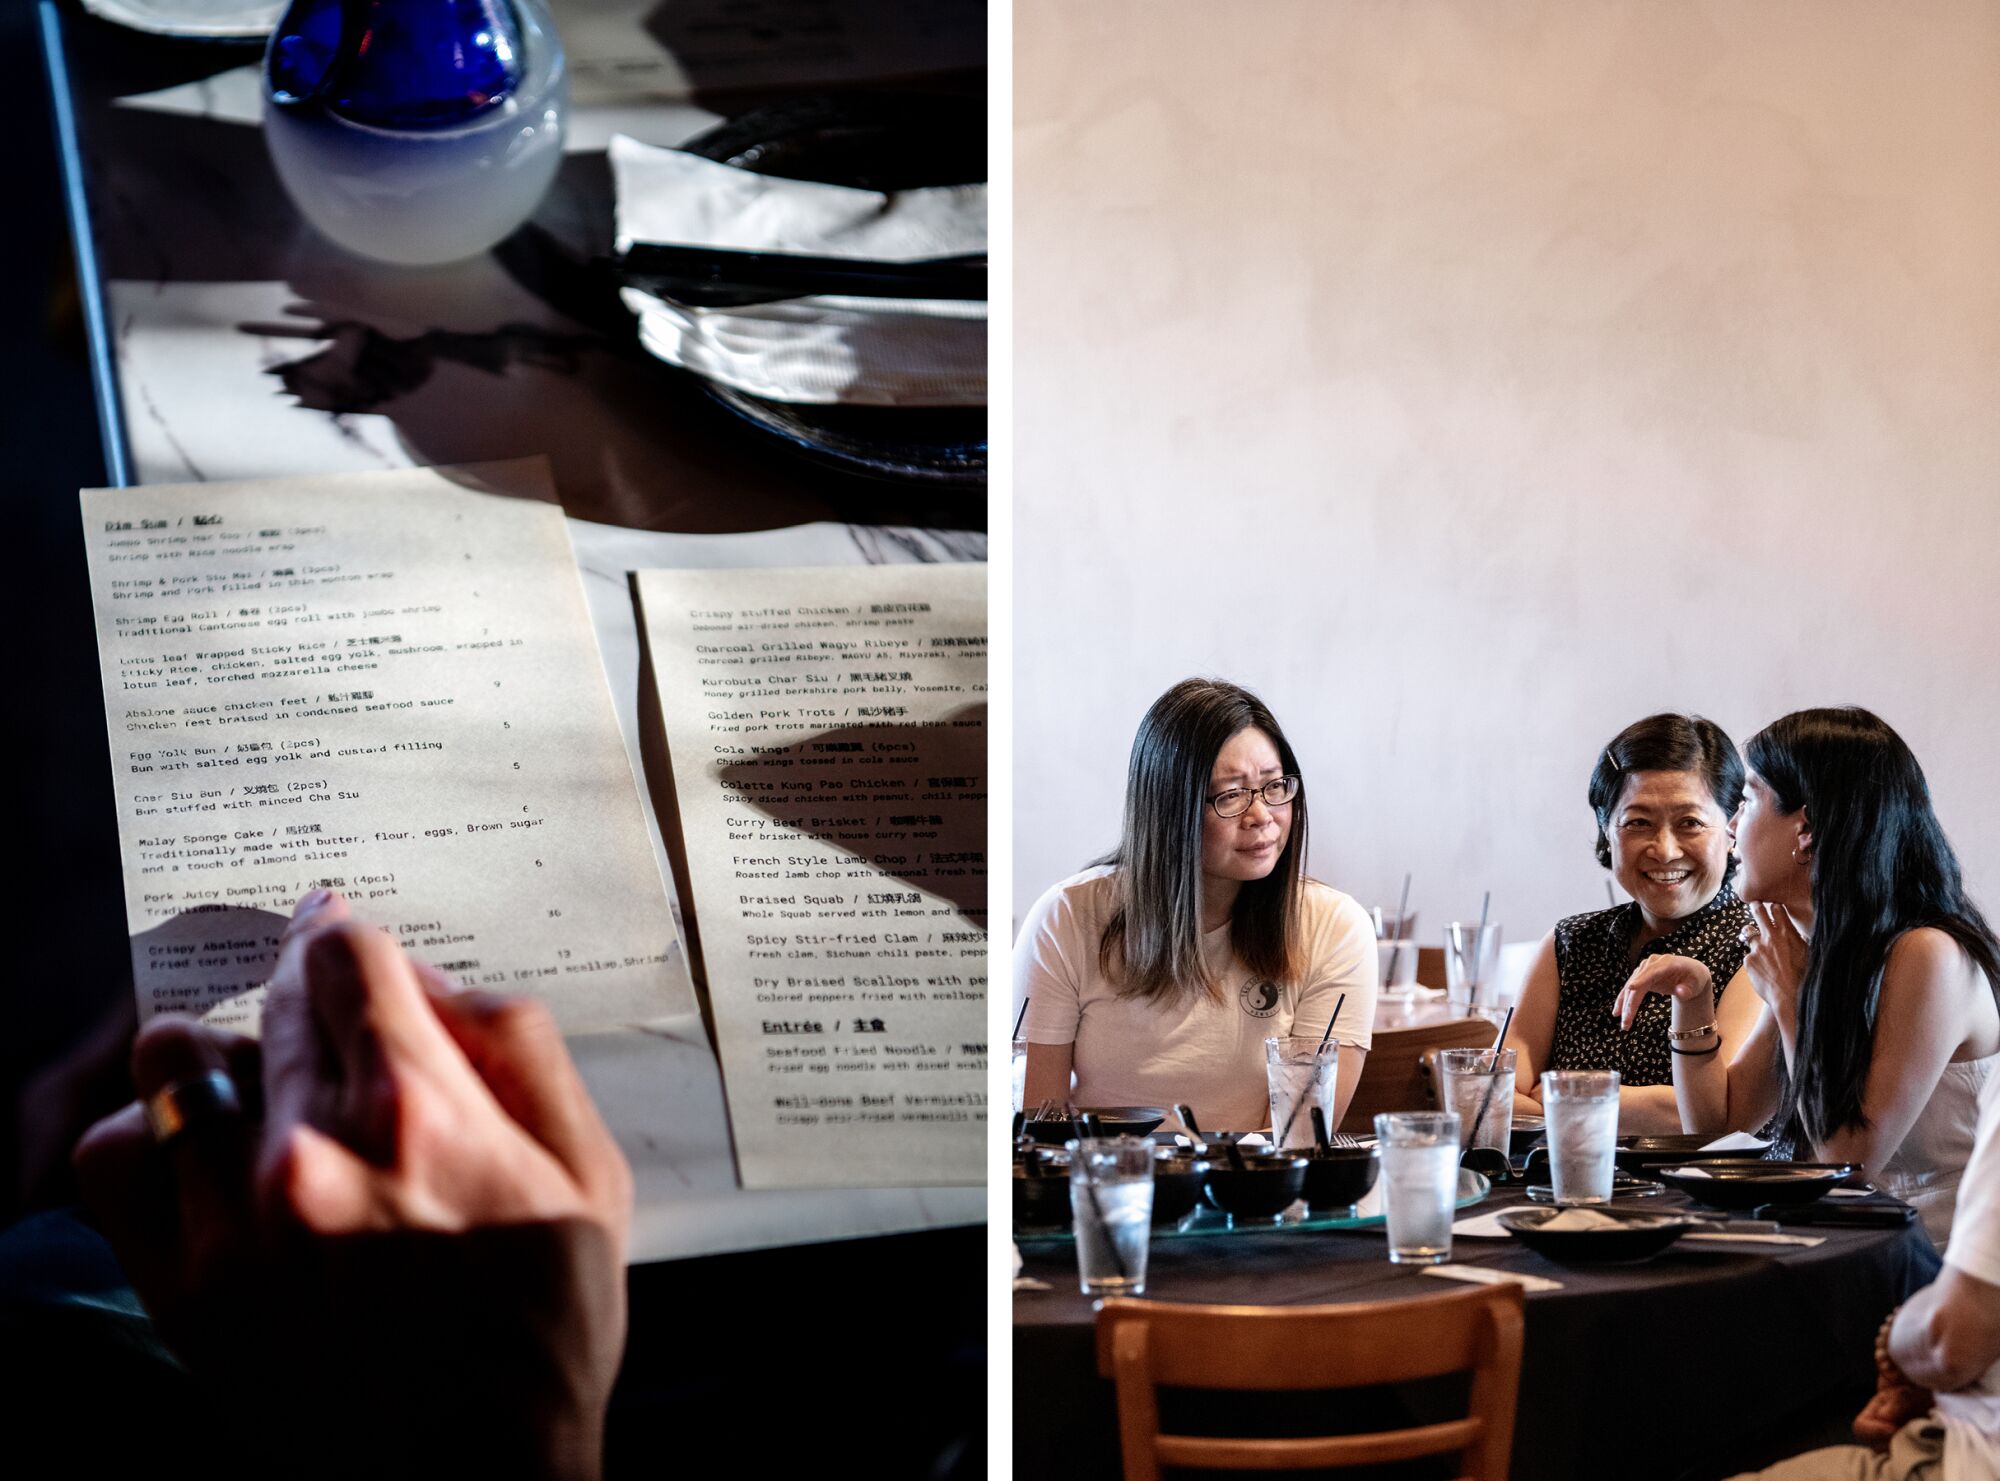 Two photos side by side, one of a hand on a menu in evening light, left, and one of a group of women around a table, right.